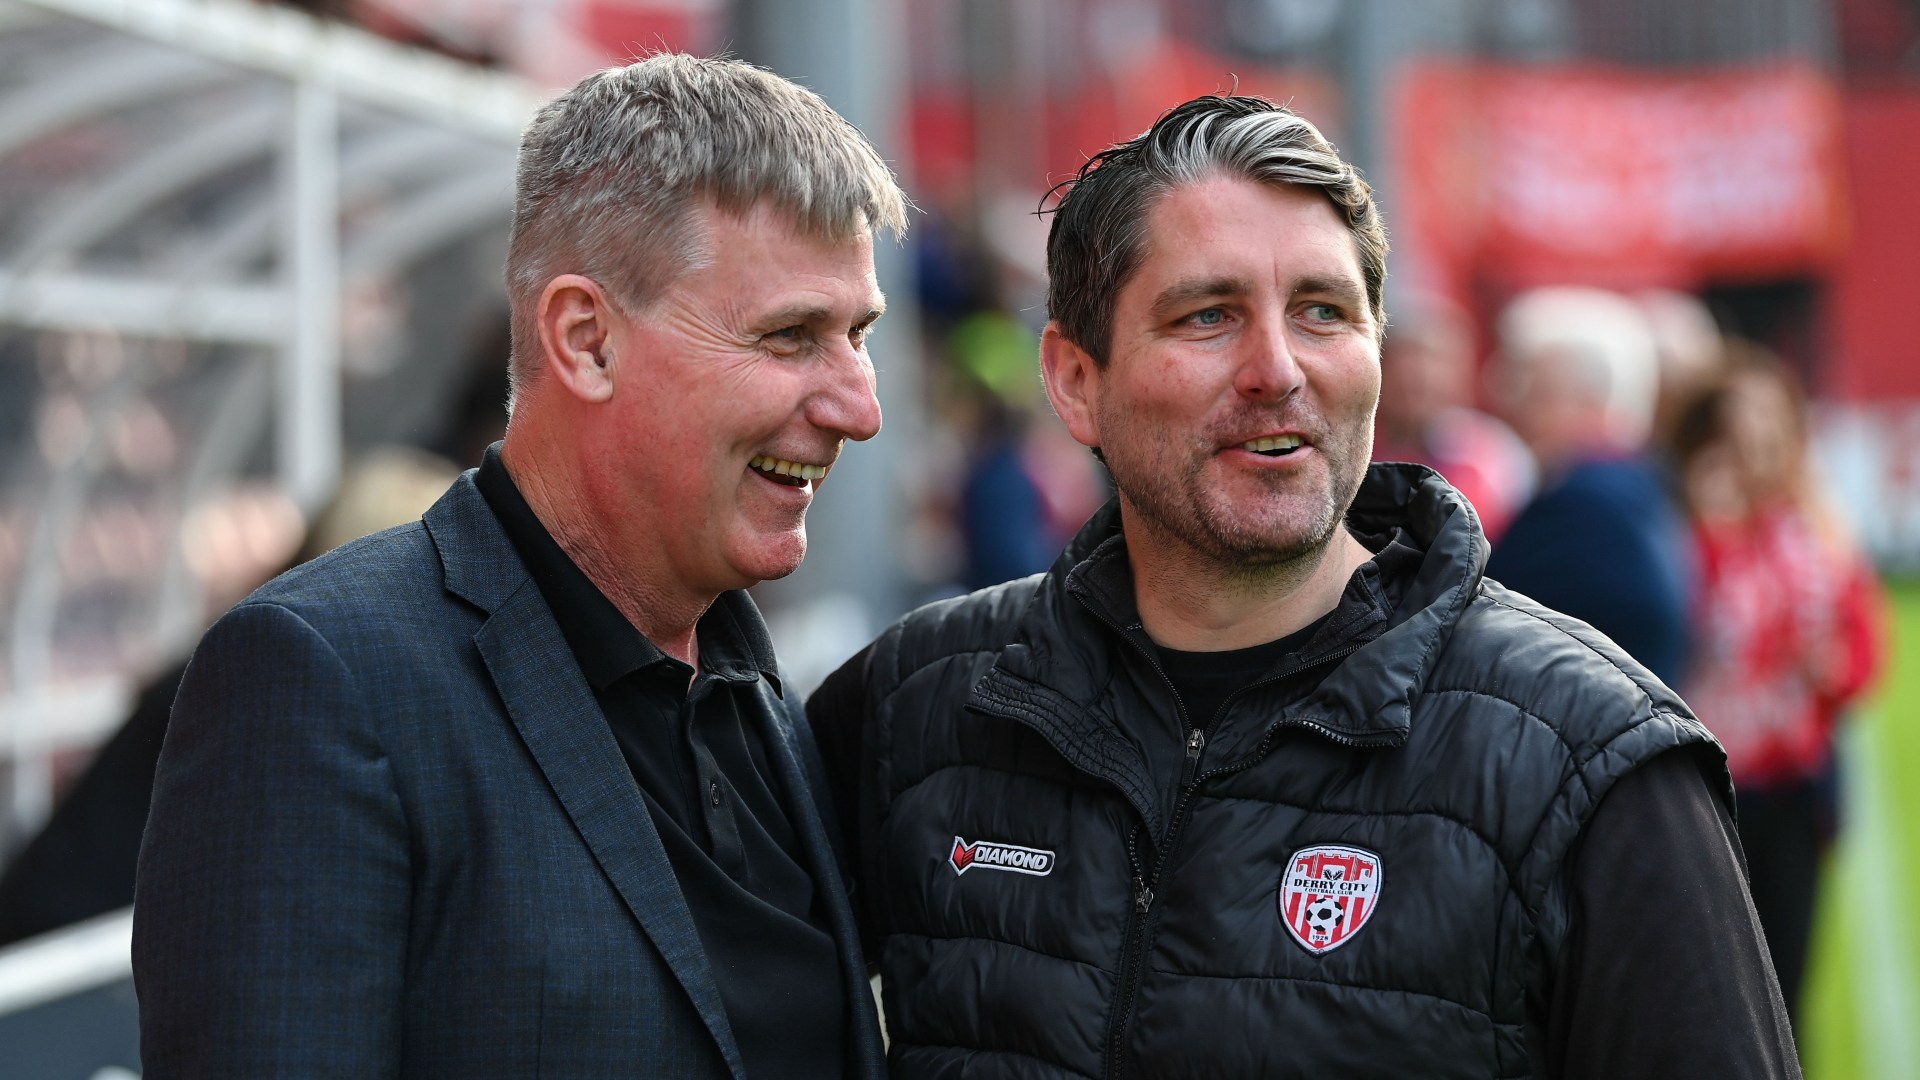 Stephen Kenny suffers defeat in his first game as St Patrick’s Athletic manager after Republic of Ireland departure [Video]